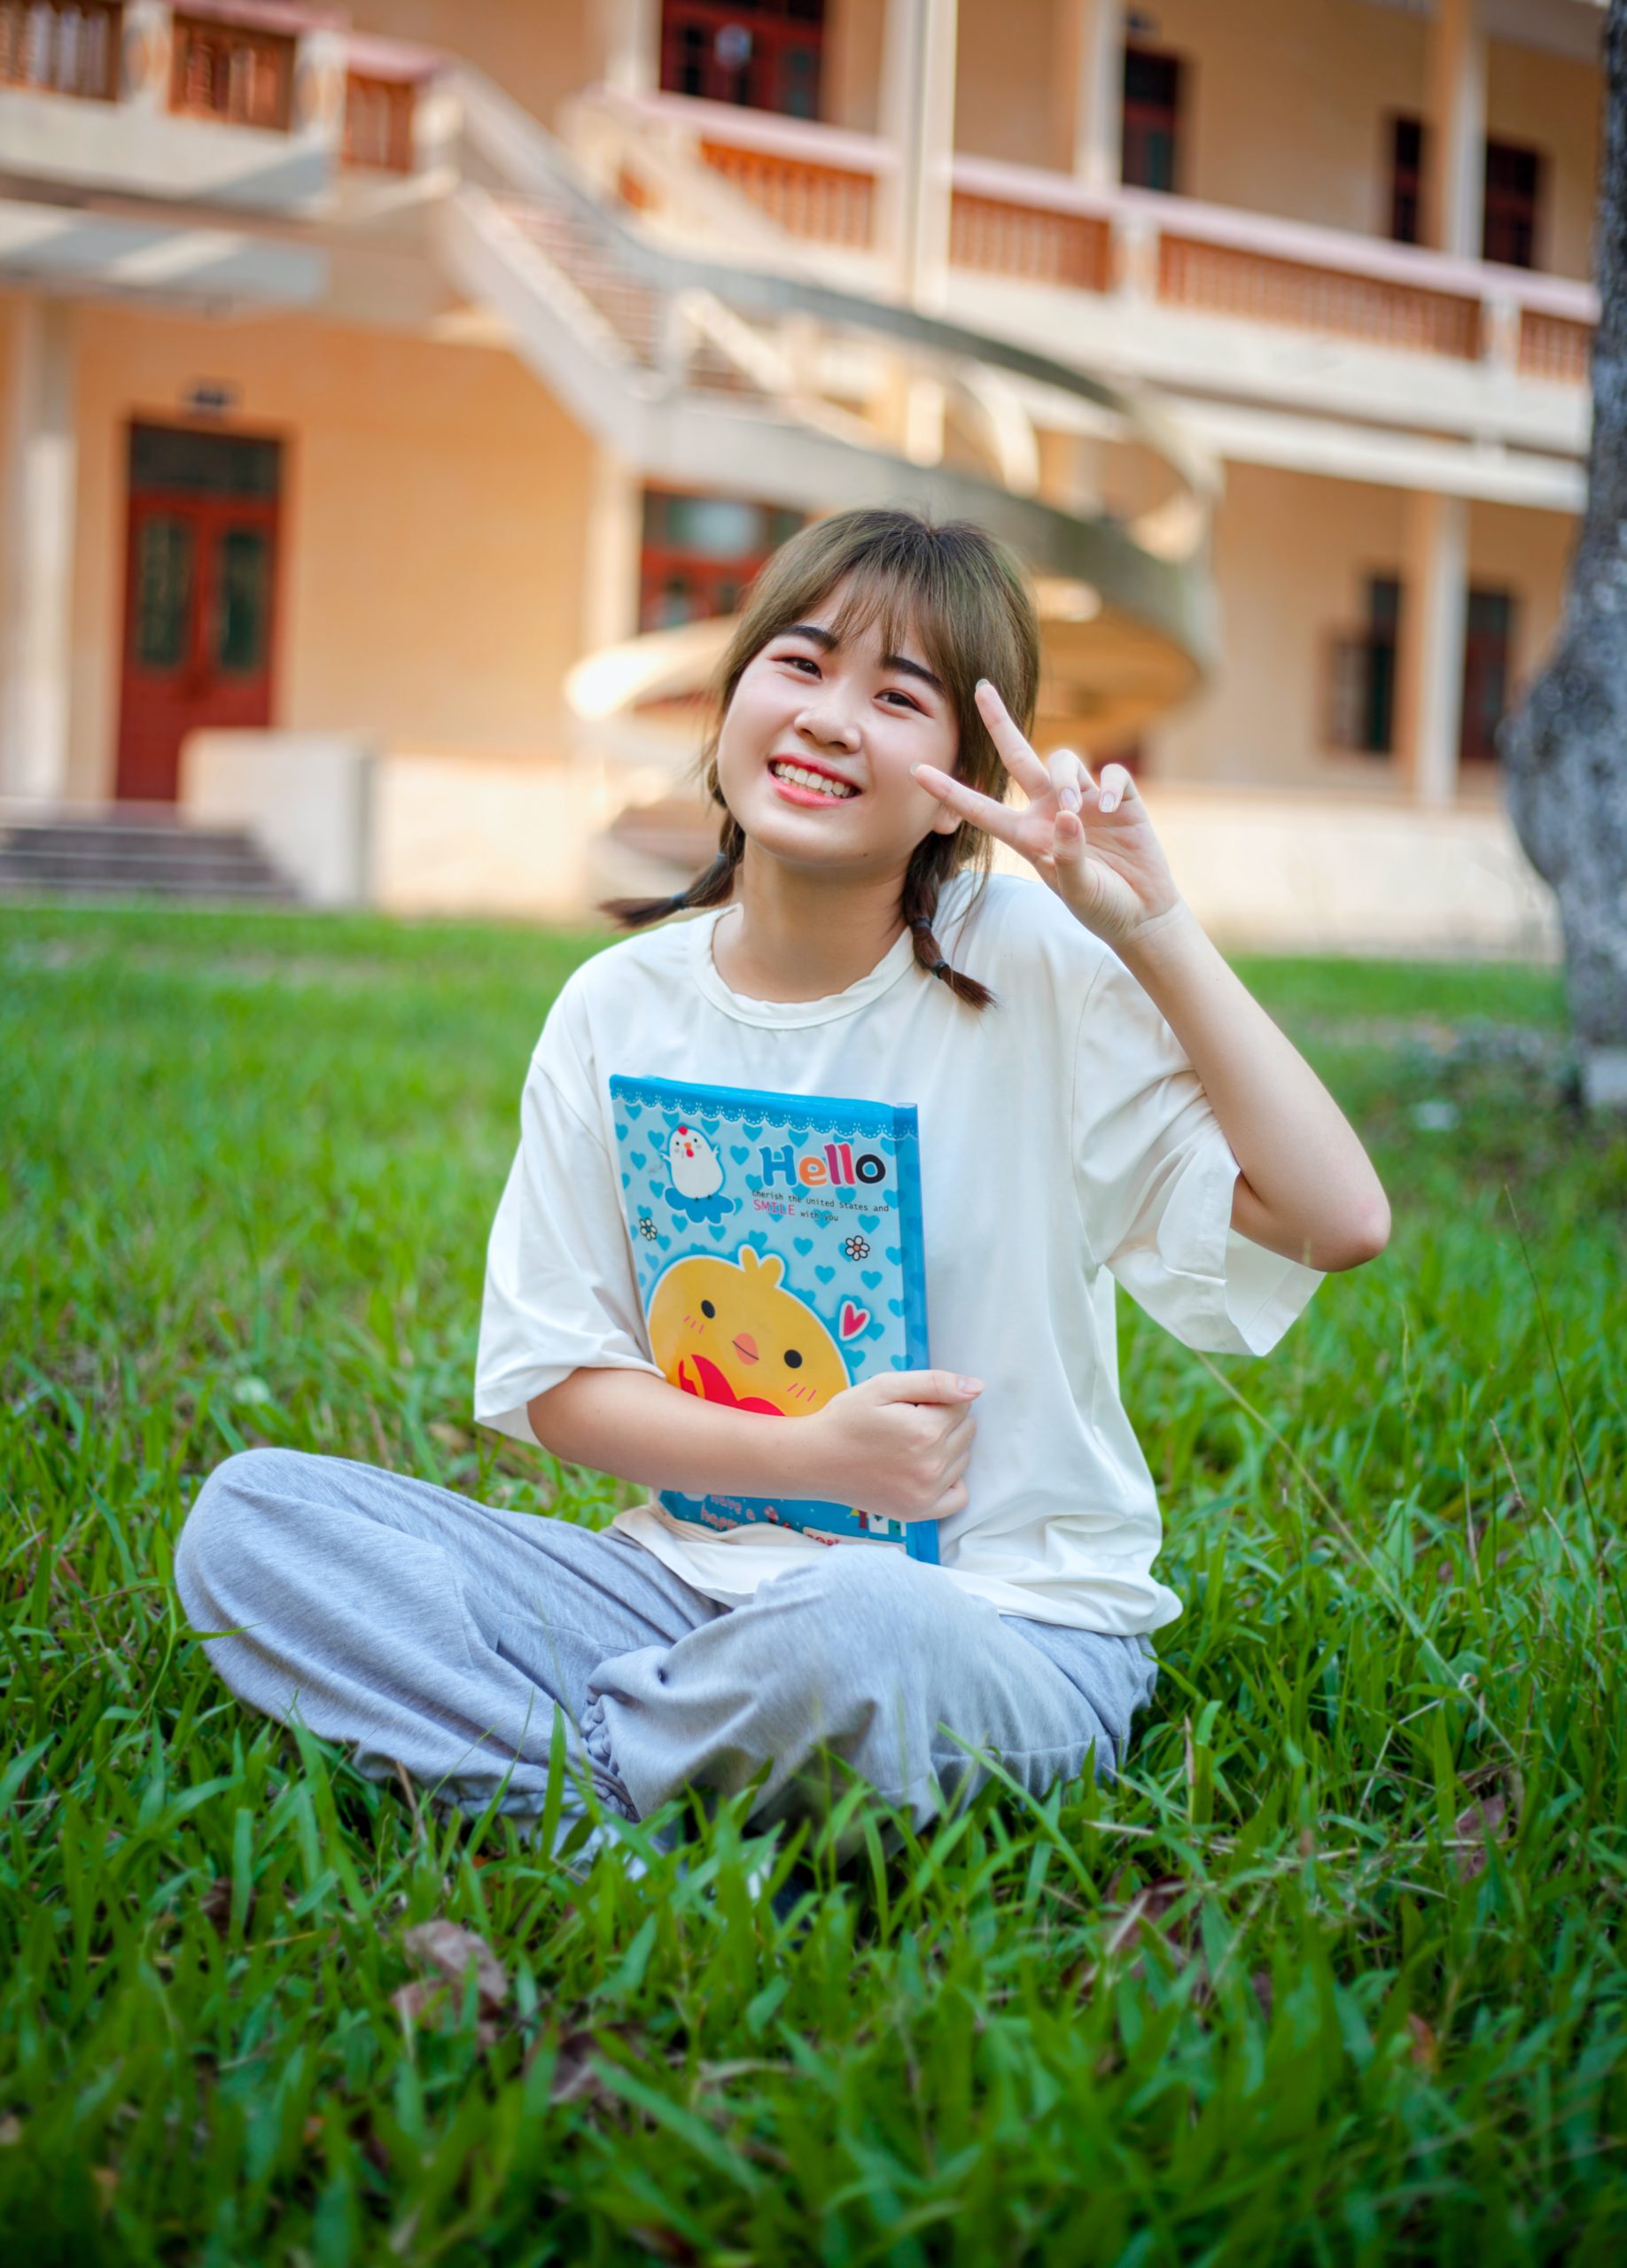 a young girl sitting in the grass holding a book